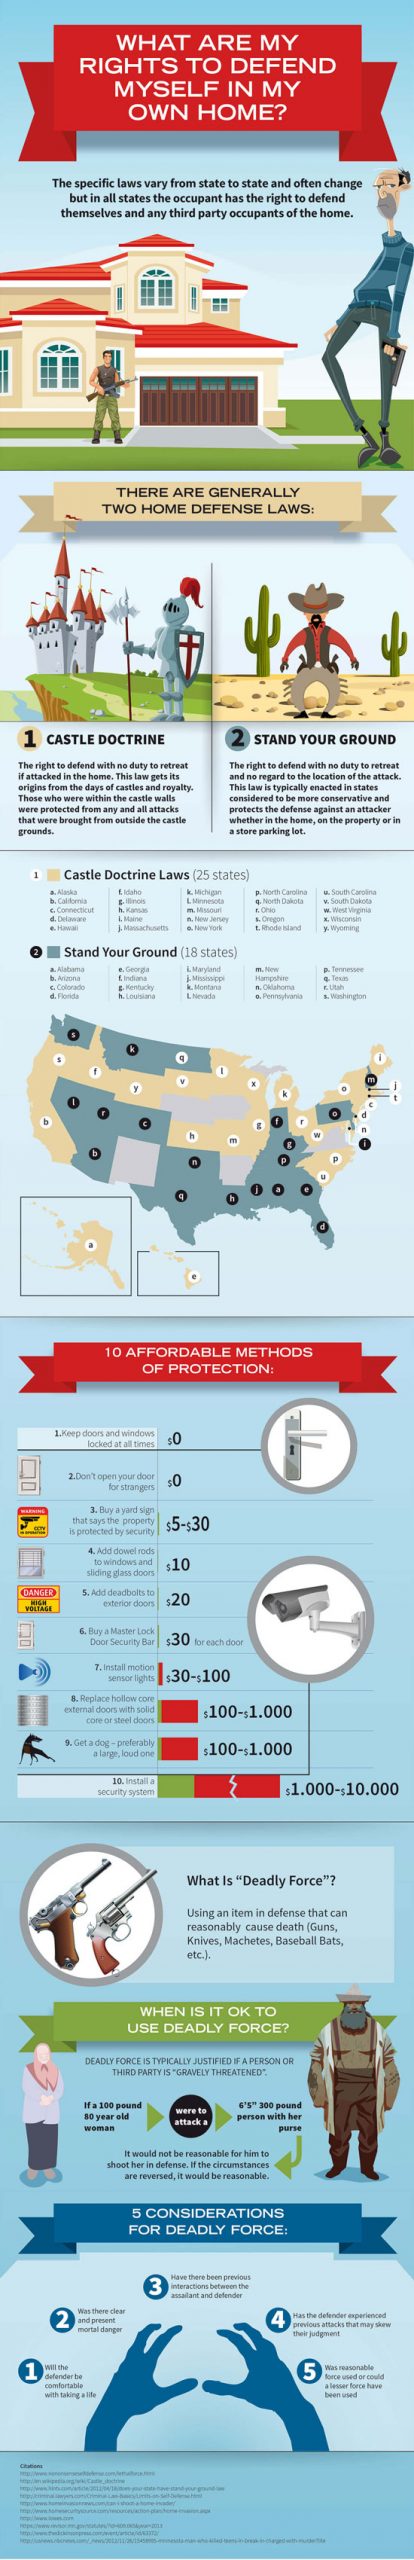 Self Defense Laws in Every State - Best Infographics